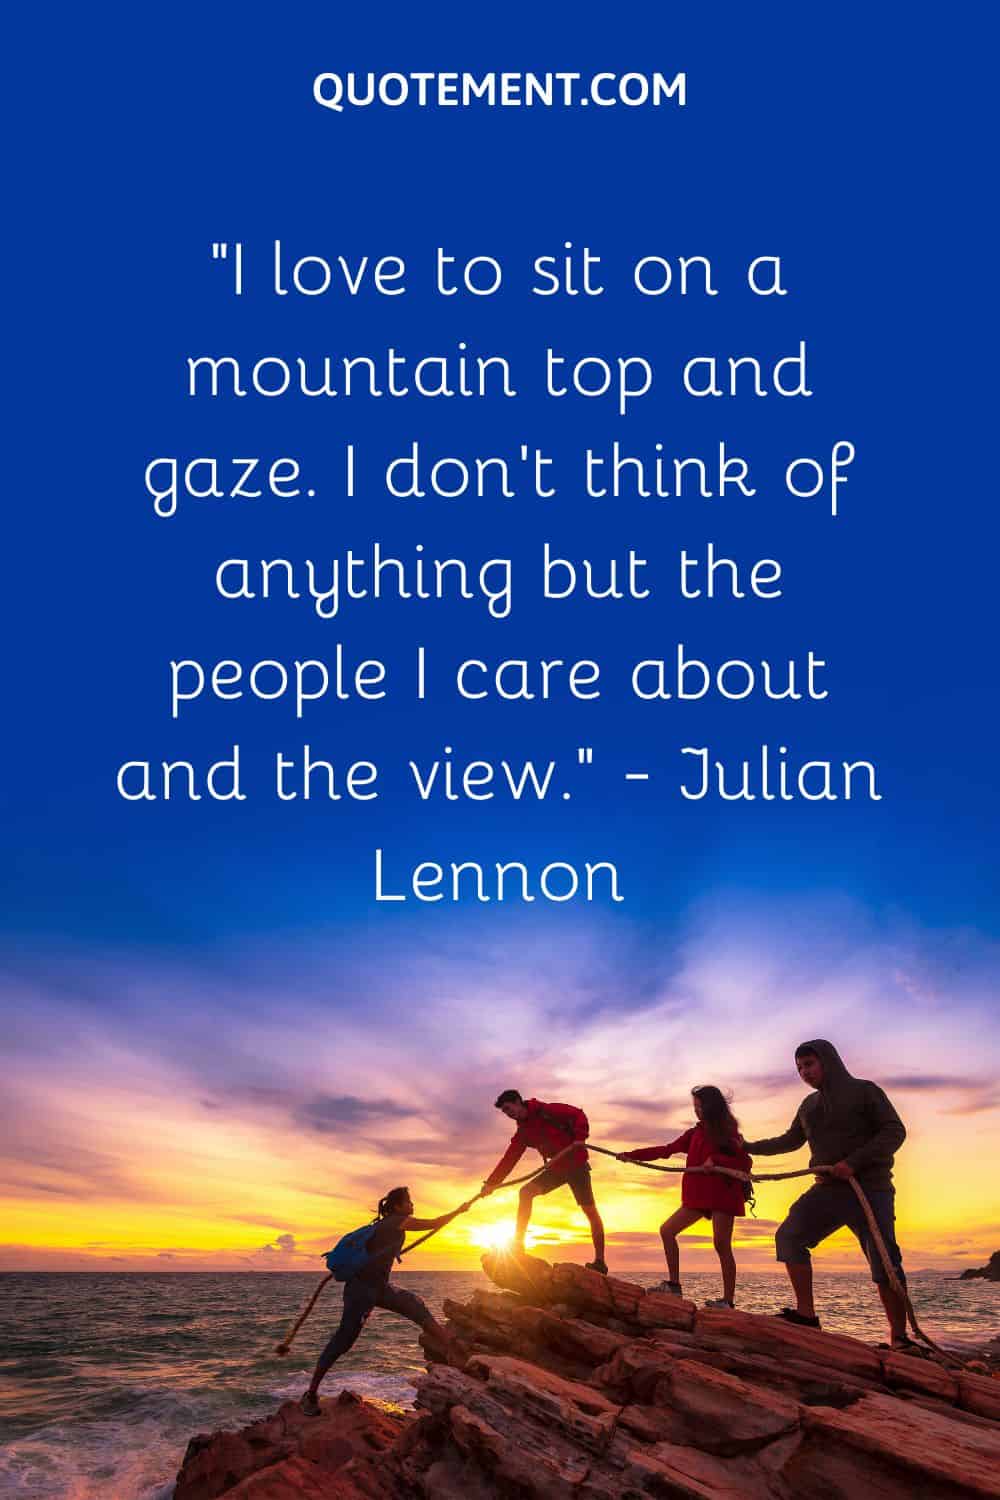 “I love to sit on a mountain top and gaze. I don’t think of anything but the people I care about and the view.” — Julian Lennon